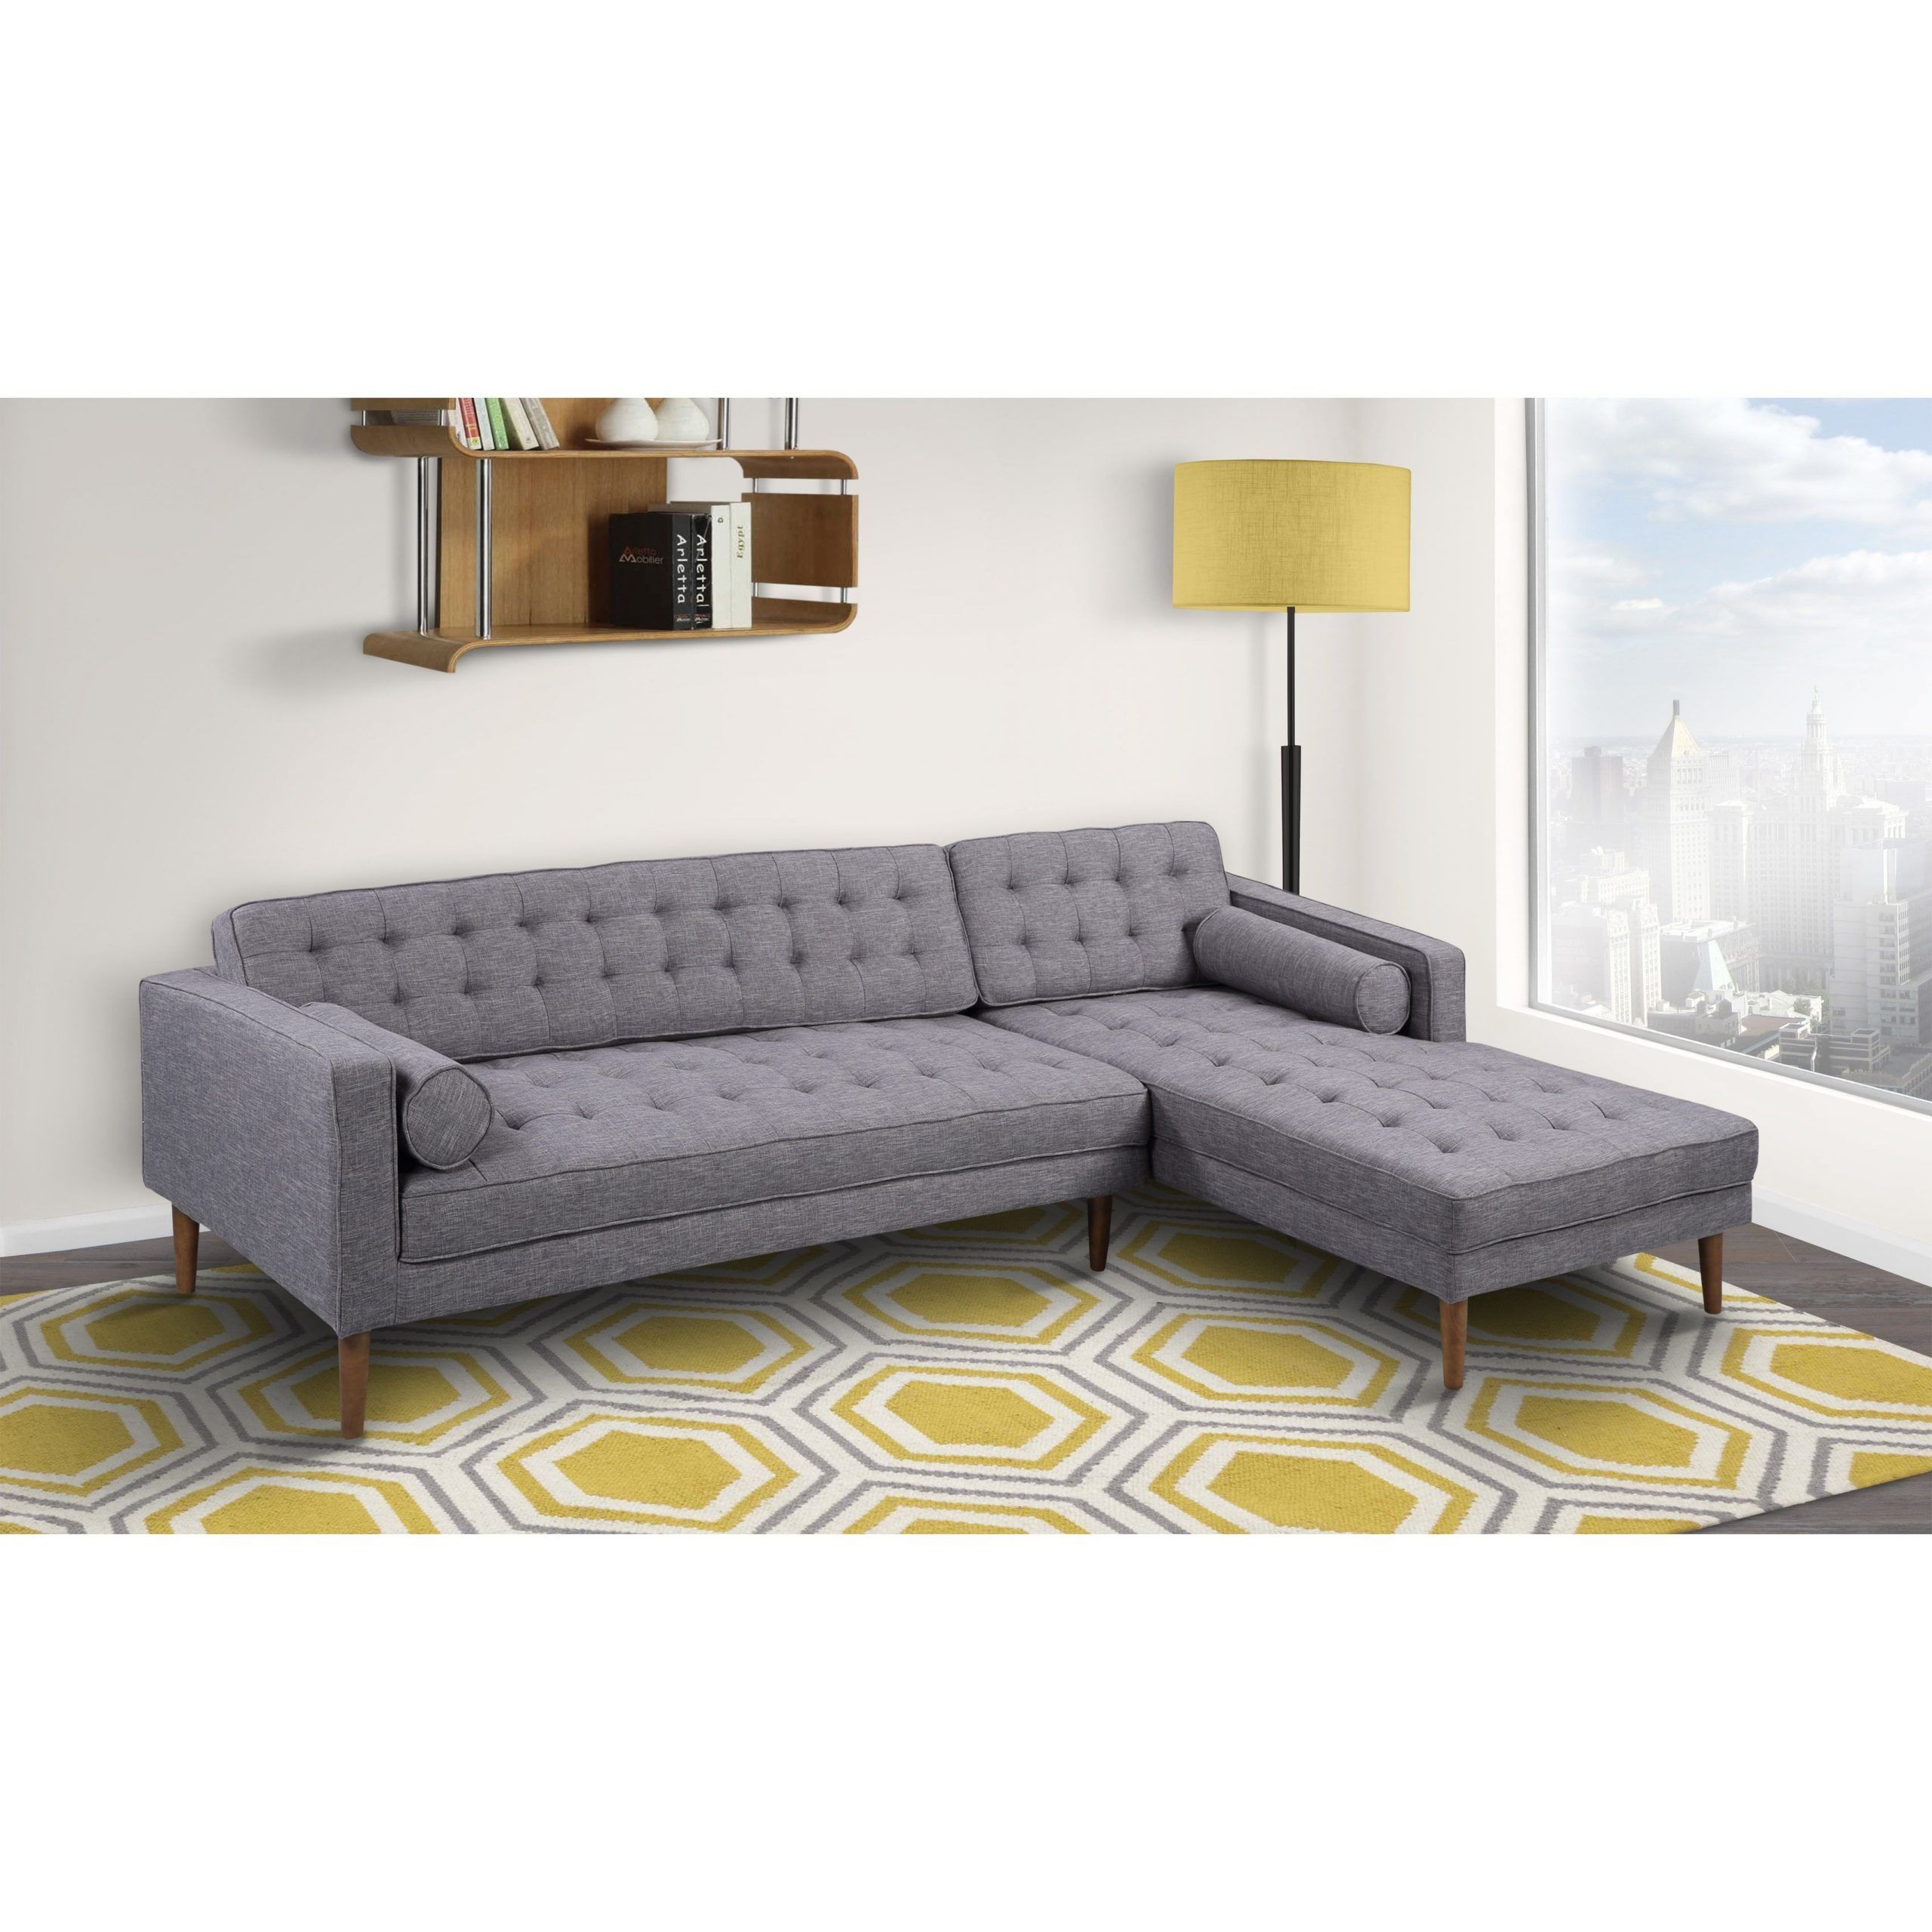 Armen Living Element Tufted Dark Grey Linen Sectional Sofa For Element Right Side Chaise Sectional Sofas In Dark Gray Linen And Walnut Legs (View 7 of 15)